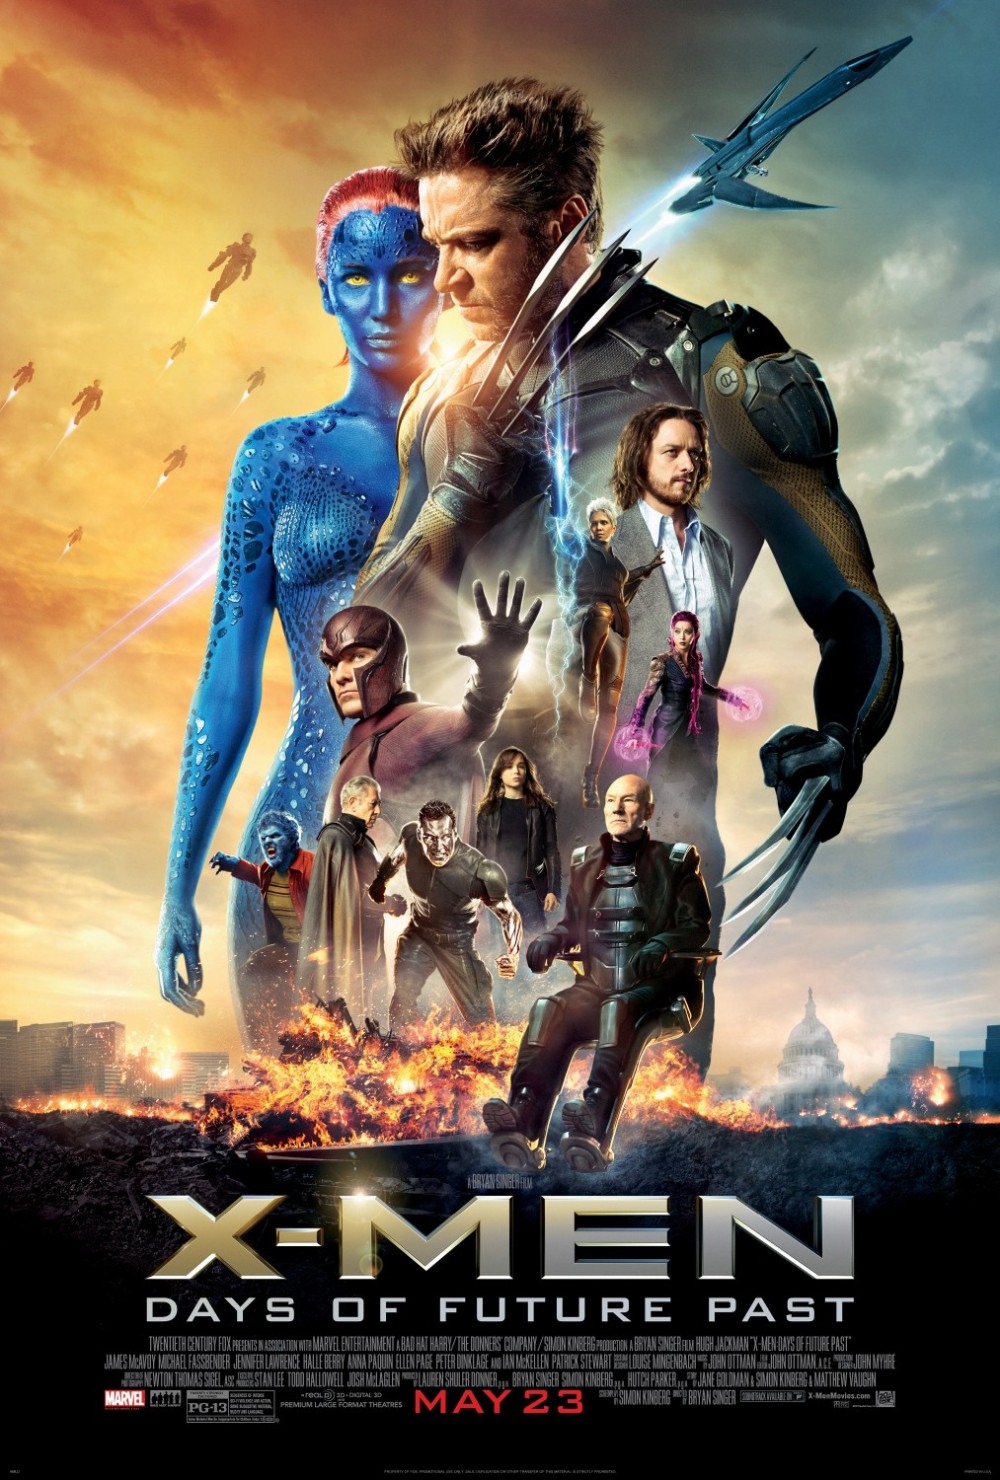 X Men Days of Future Past poster